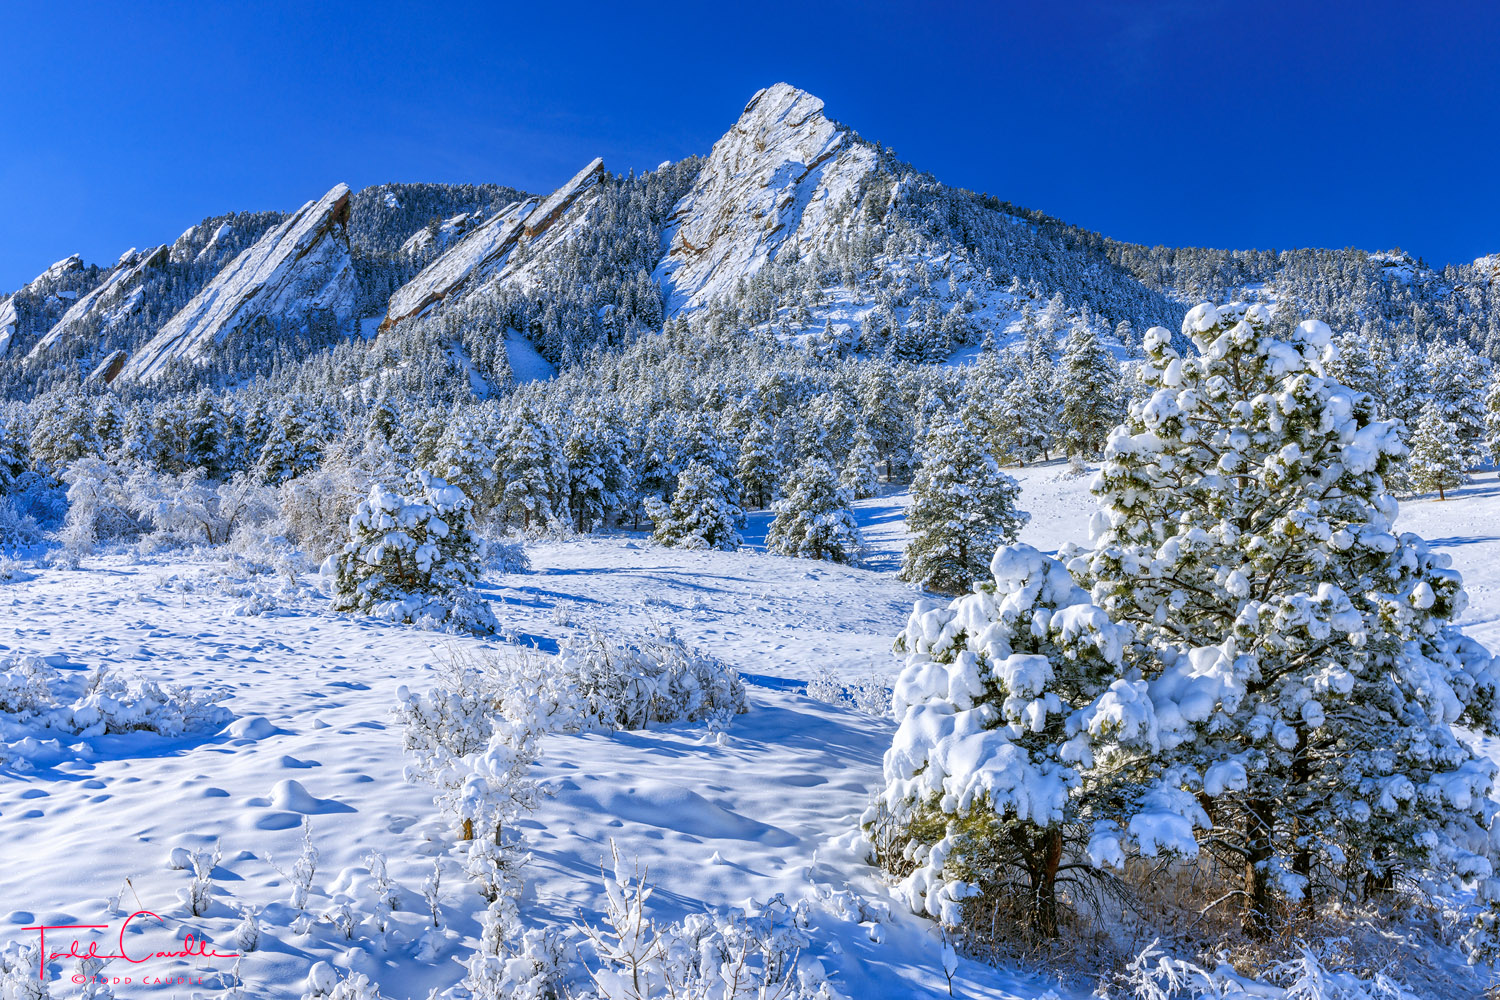 Winter magic at the Flatirons in Boulder. (not shown: me getting my truck stuck in a snow drift on the way home...)